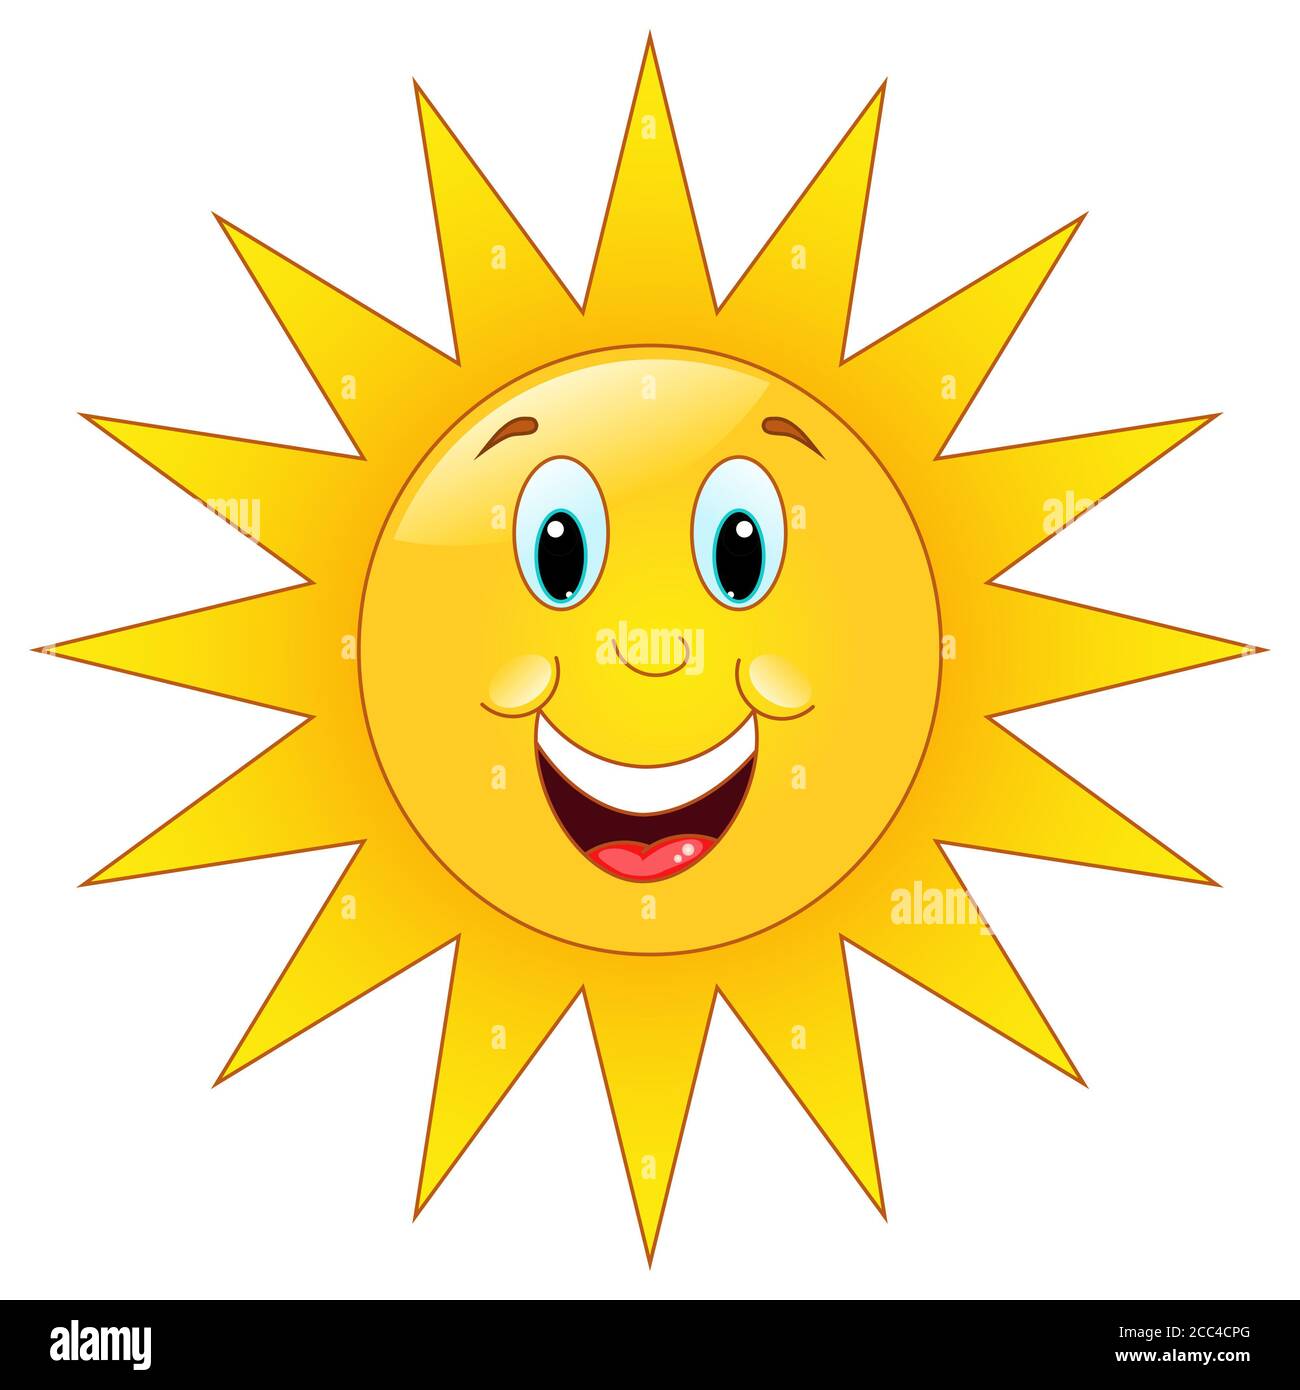 Illustration of a happy sun with a white background Stock Photo - Alamy